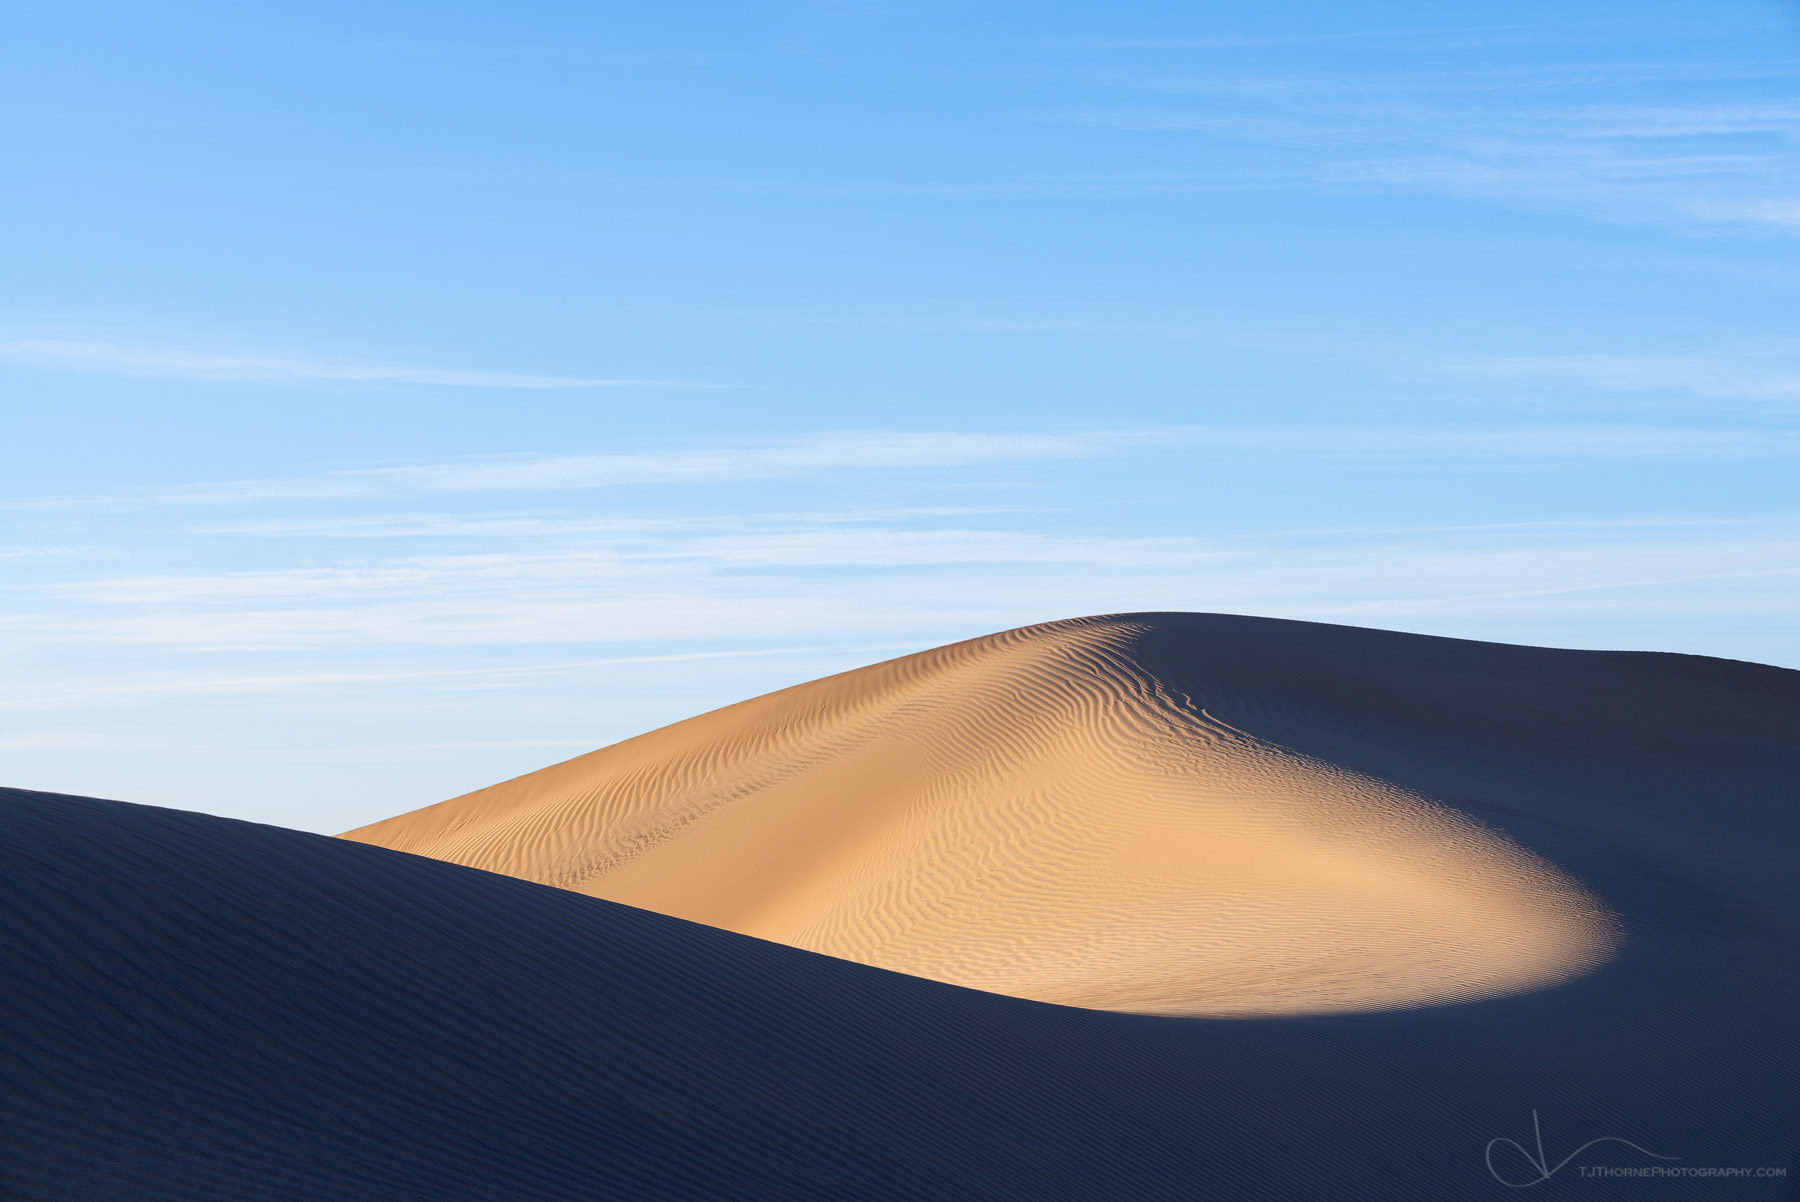 Early evening light on Mesquite Sand Dunes in Death Valley National Park, California.